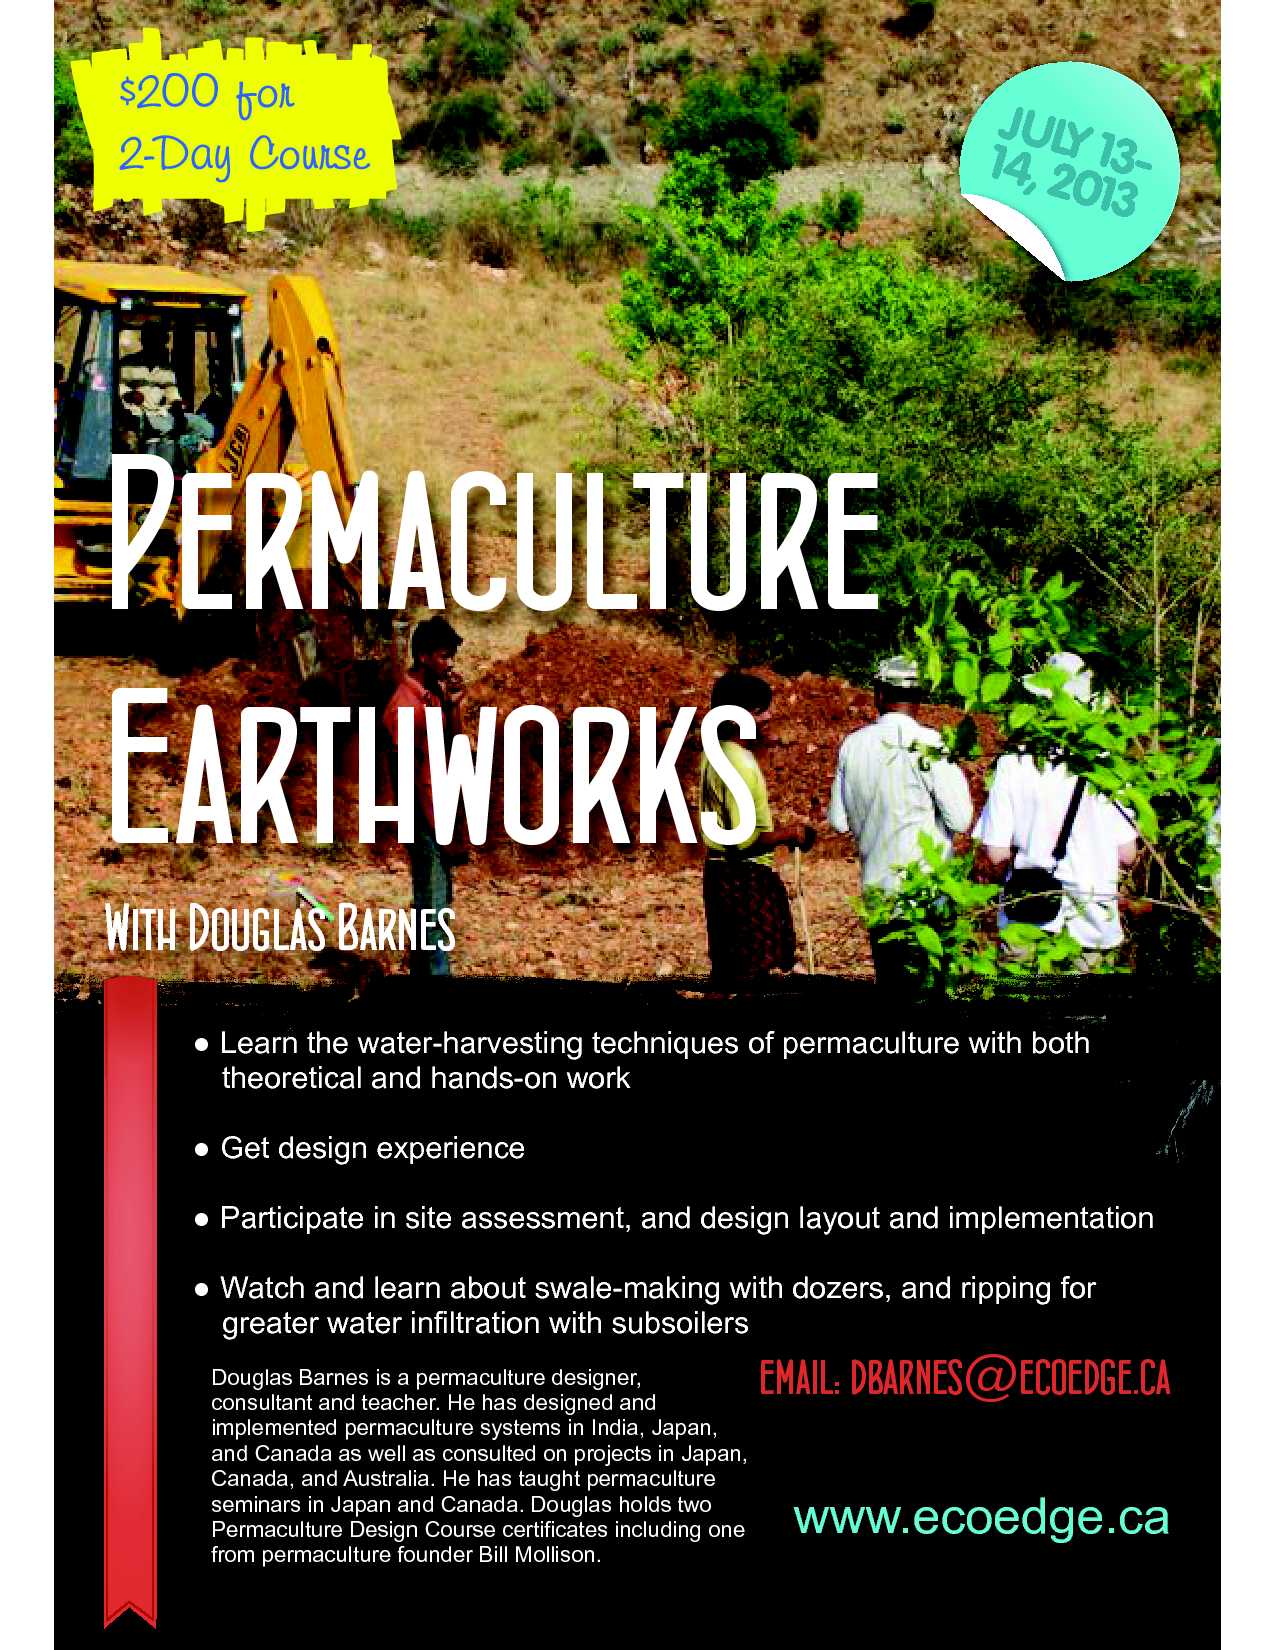 earthworks course poster